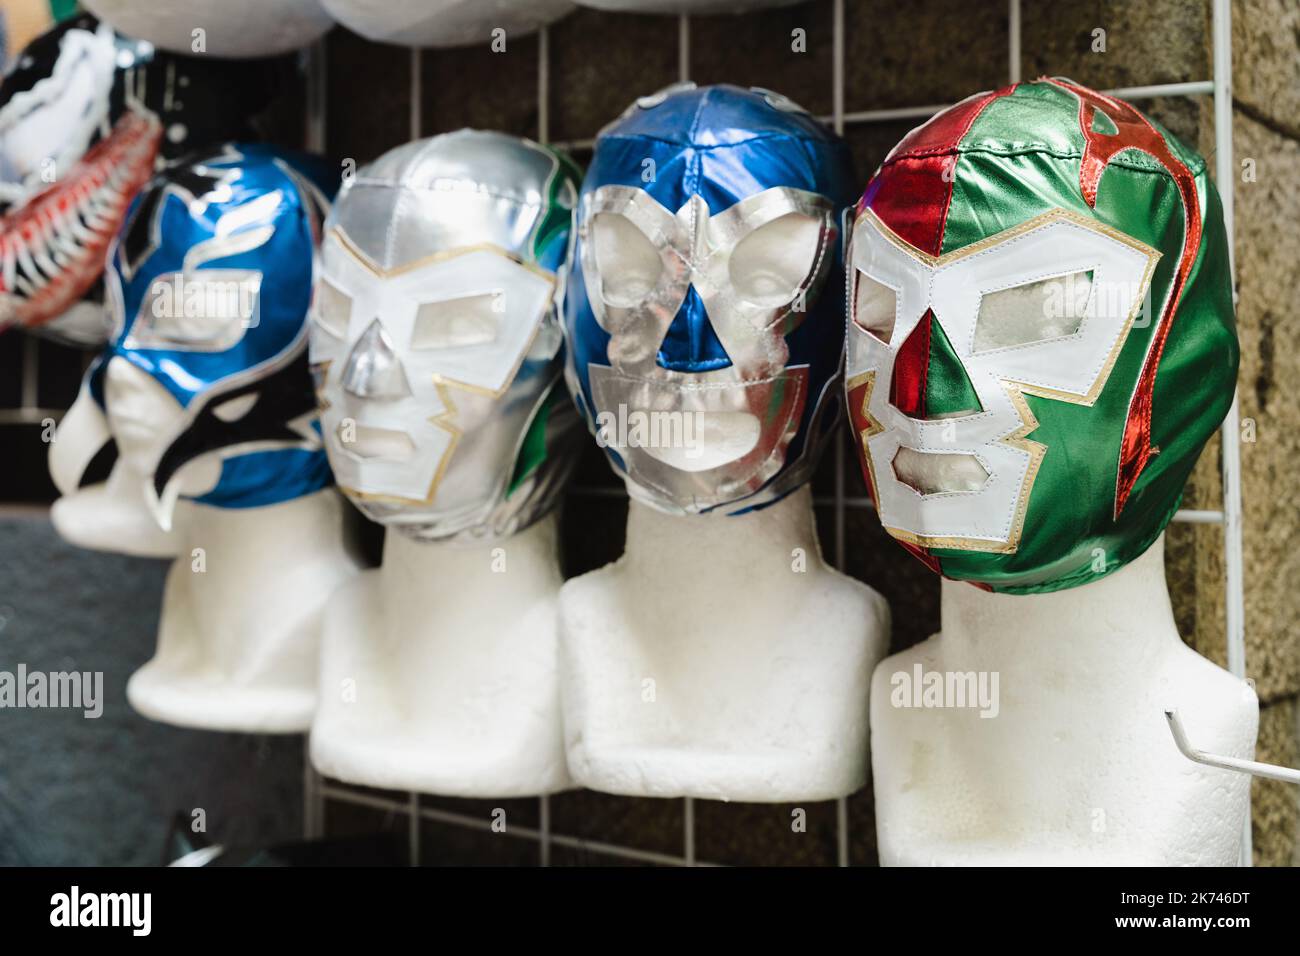 Mexican wrestling masks on mannequin heads. Traditional sport souvenir from Mexico Stock Photo